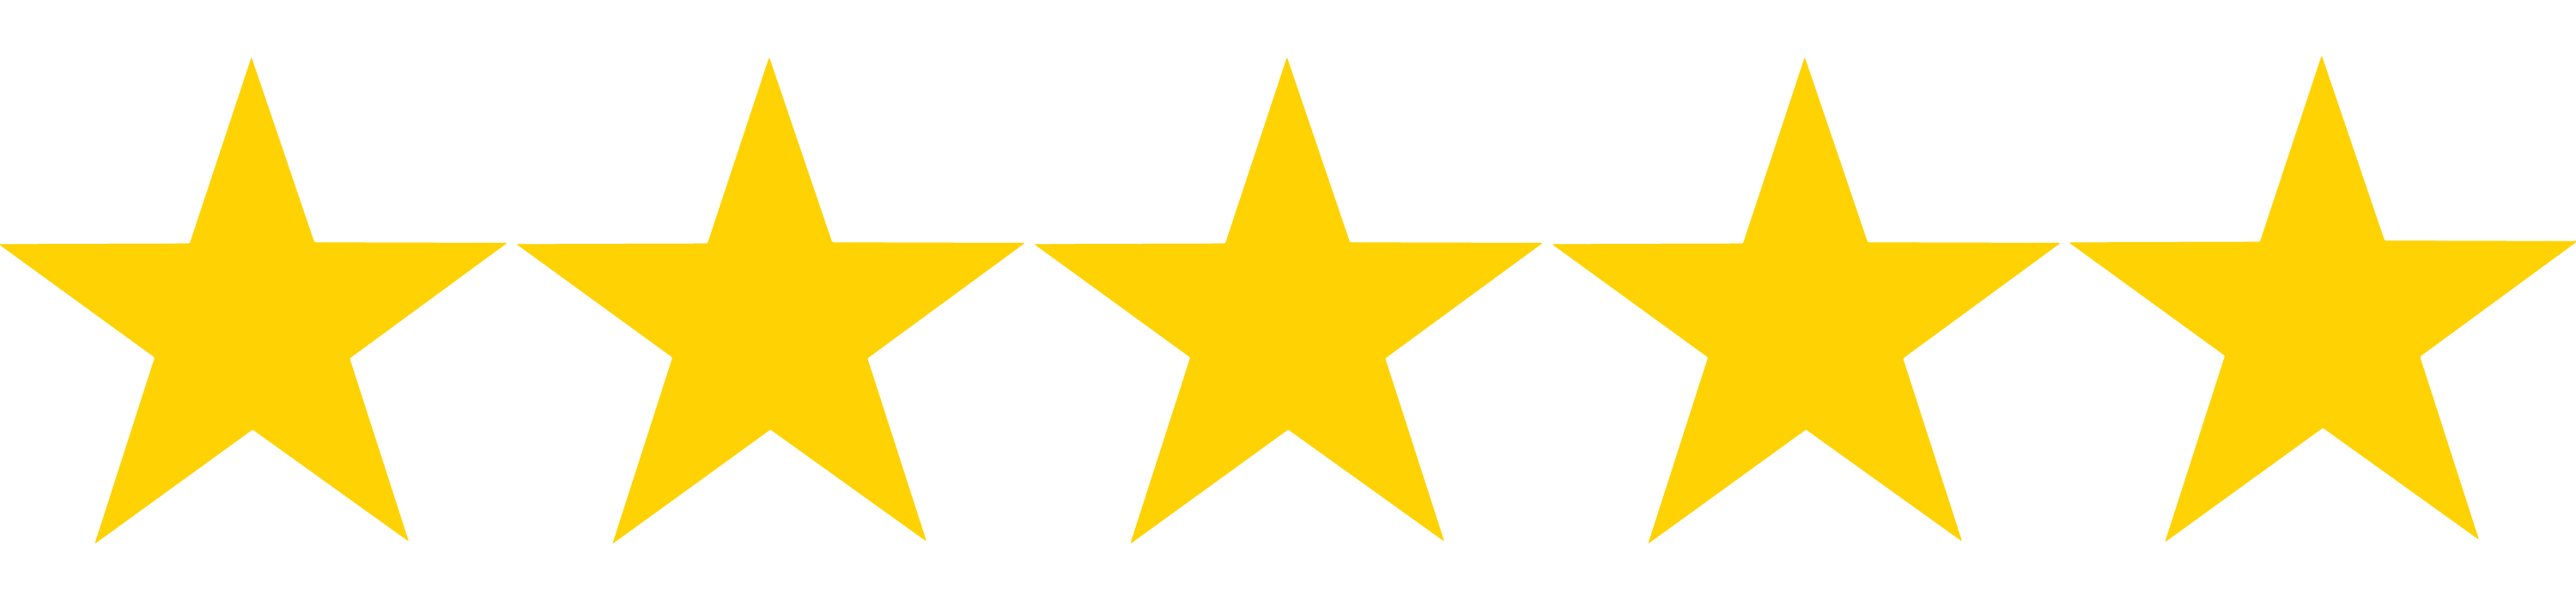 Five Stars!   Five Hd Png - Yellow Stars, Transparent background PNG HD thumbnail